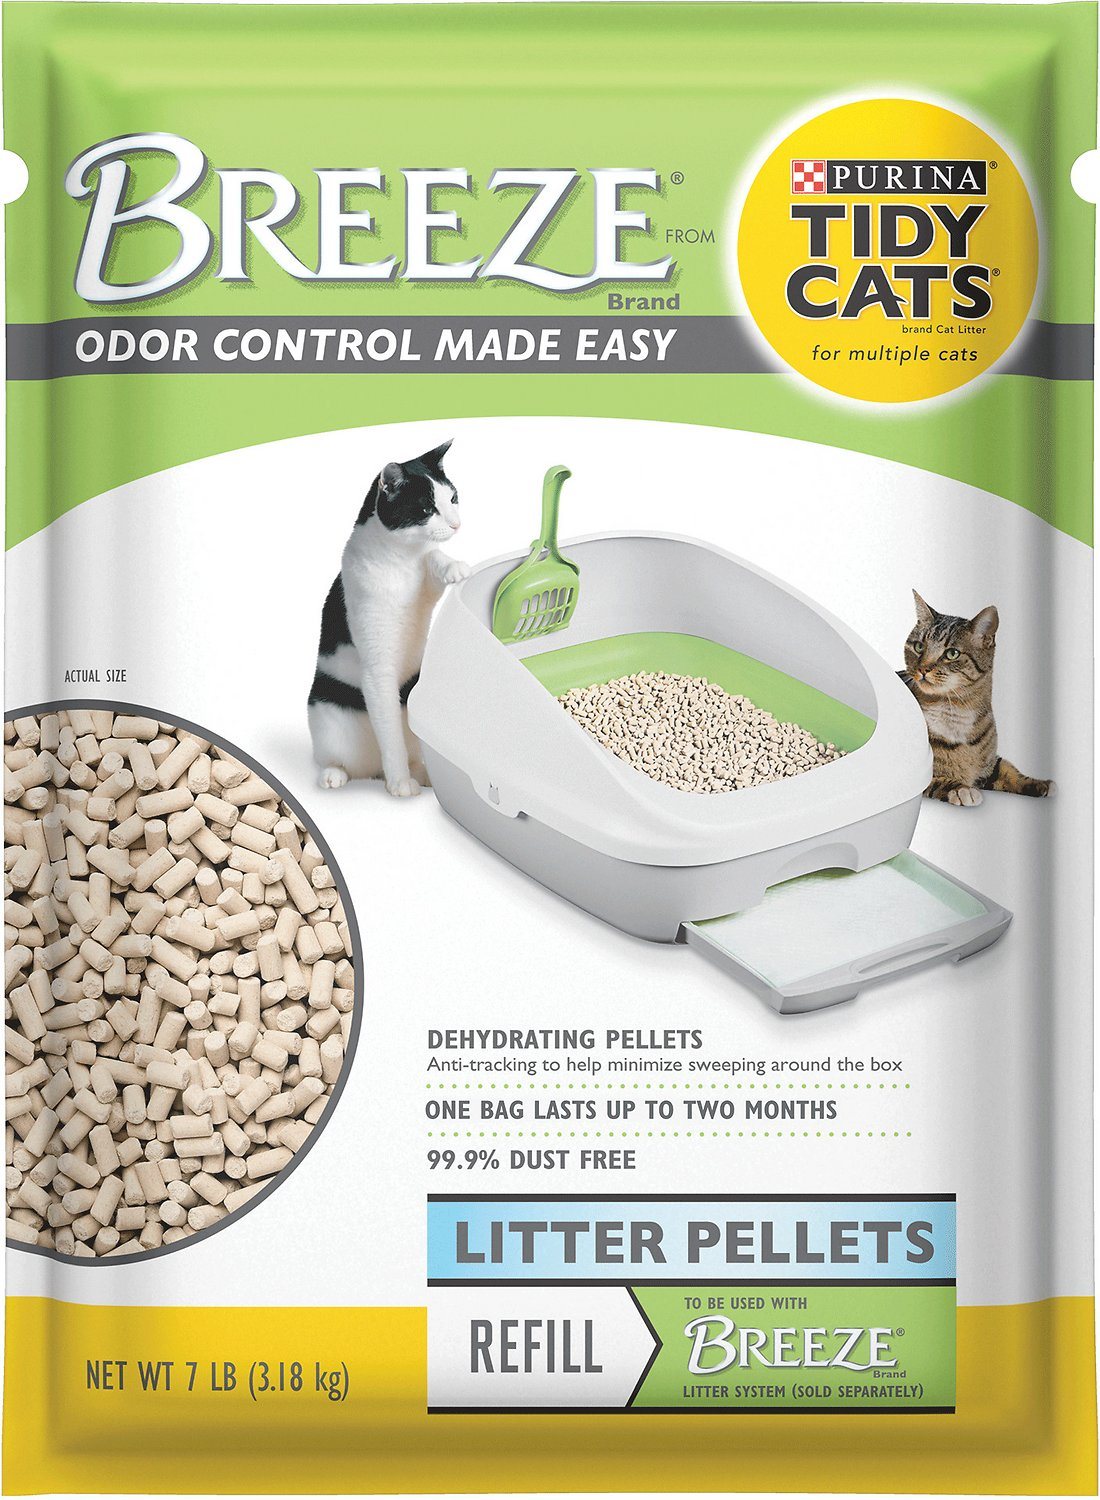 The Best Cat Litter Brands of 2018 | Reviews, Ratings ...